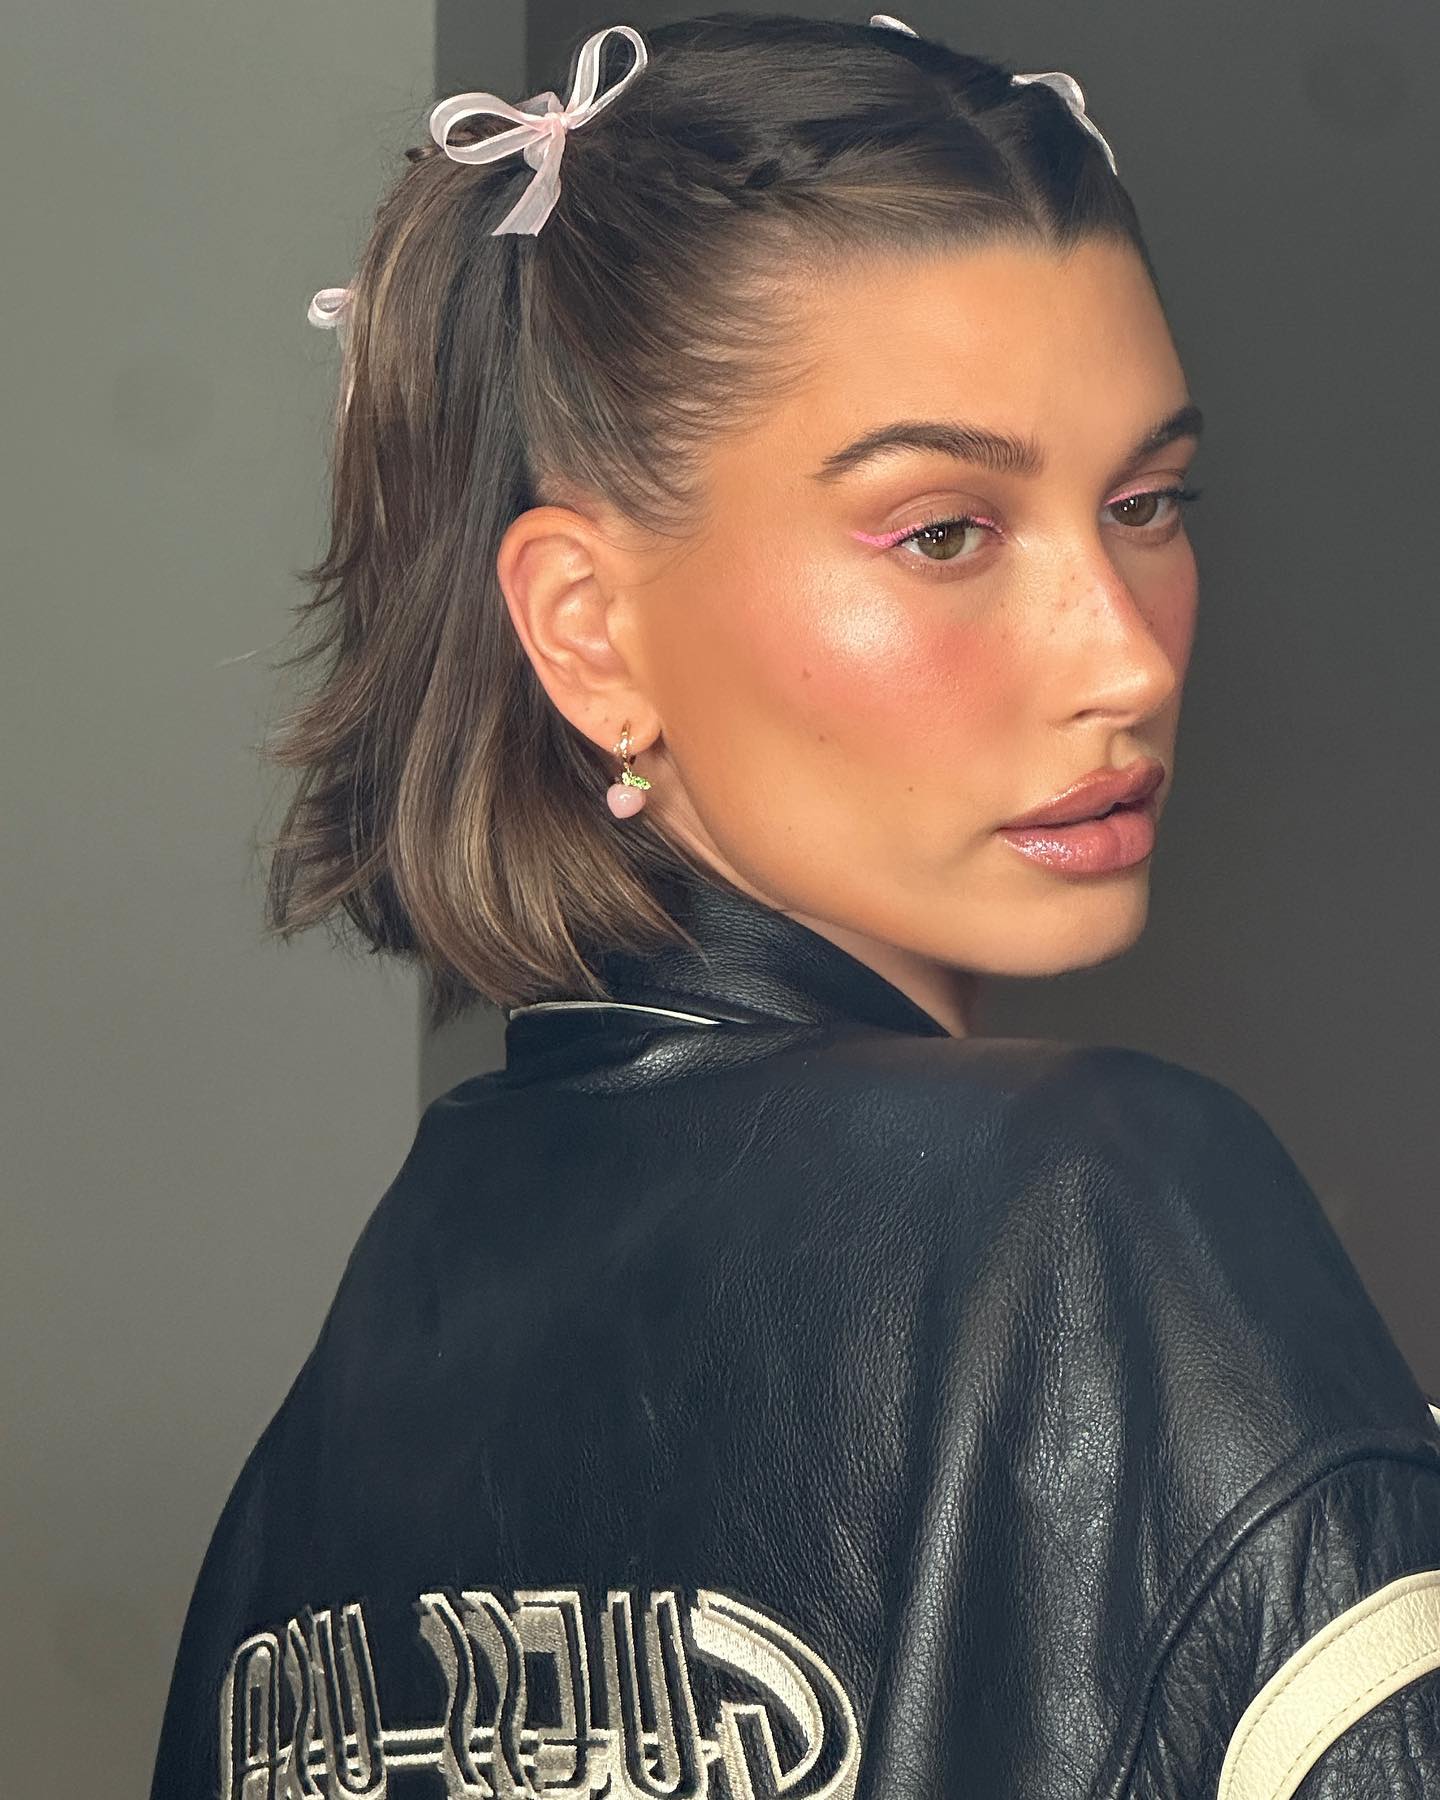 Hailey Bieber with short half up, half down hairstyle with braids and ribbons